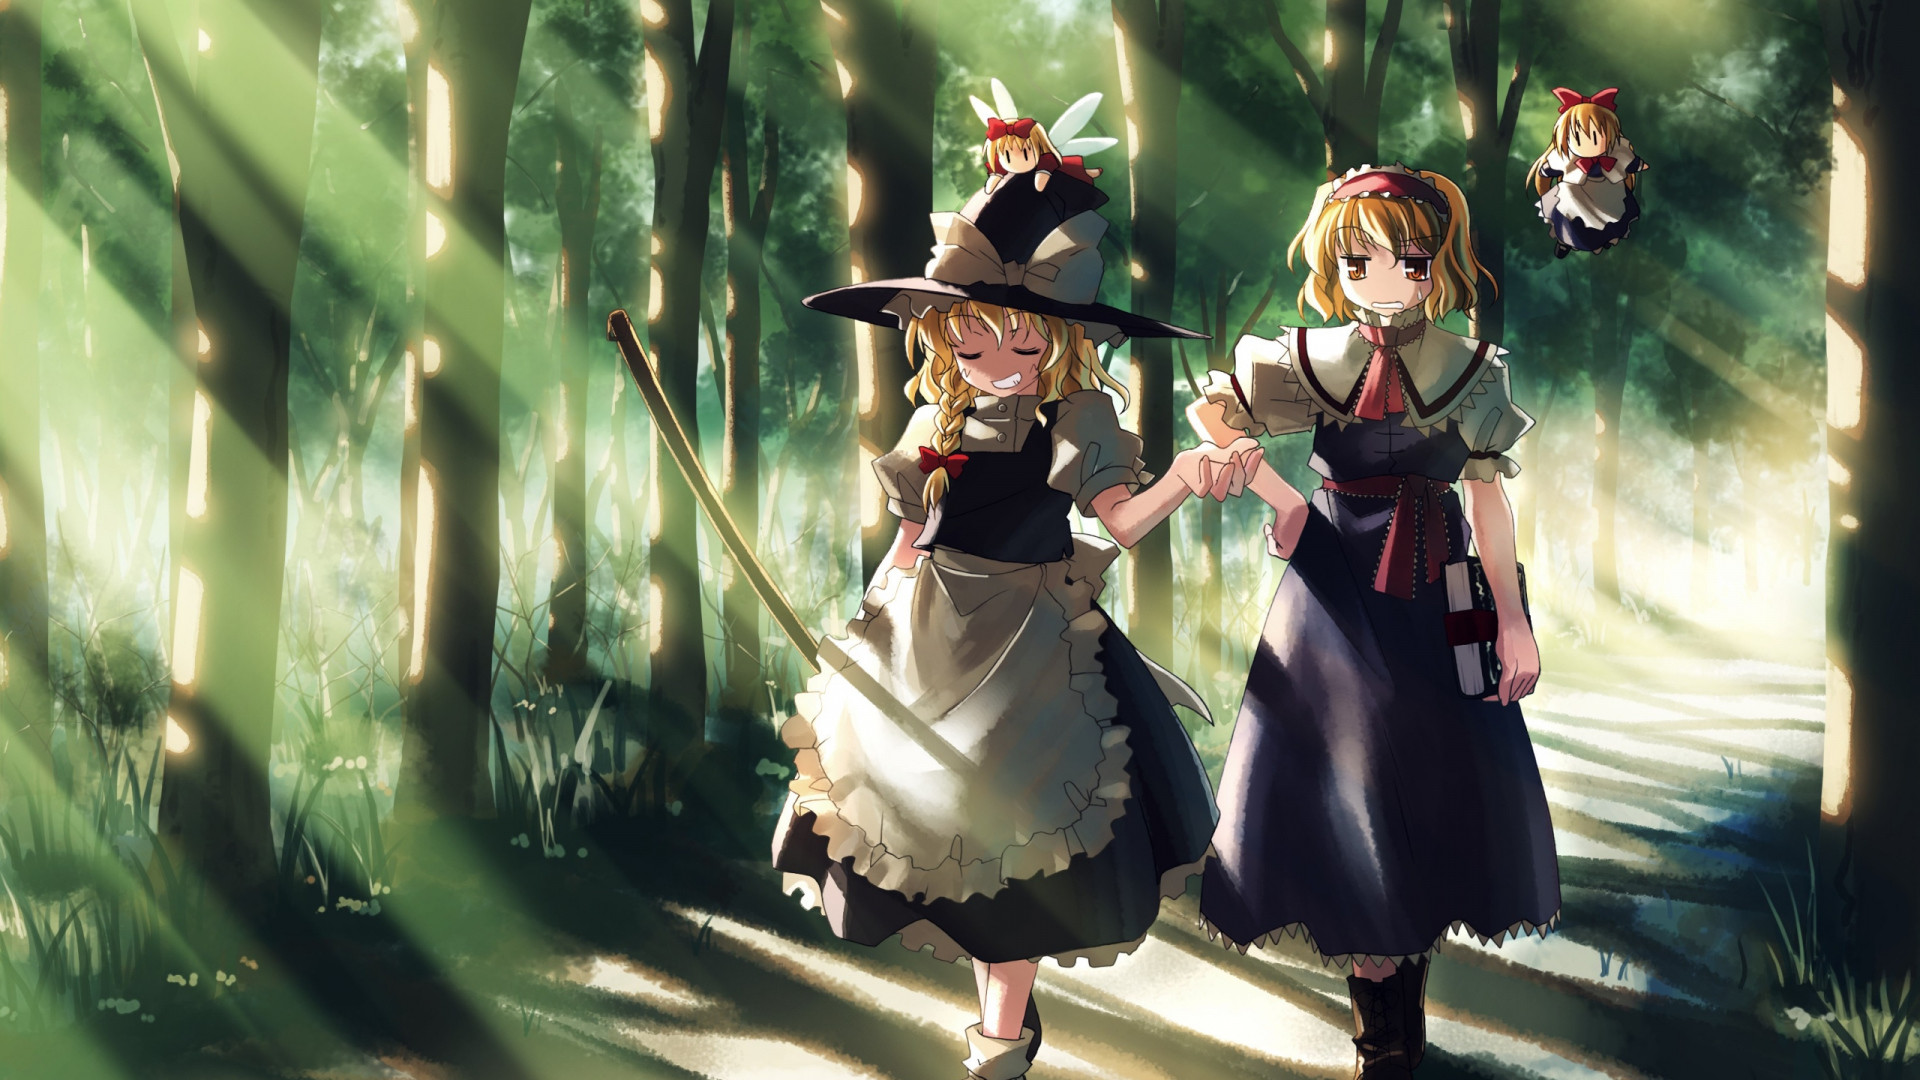 1920x1080  Wallpaper girl, witch, walk, being, forest